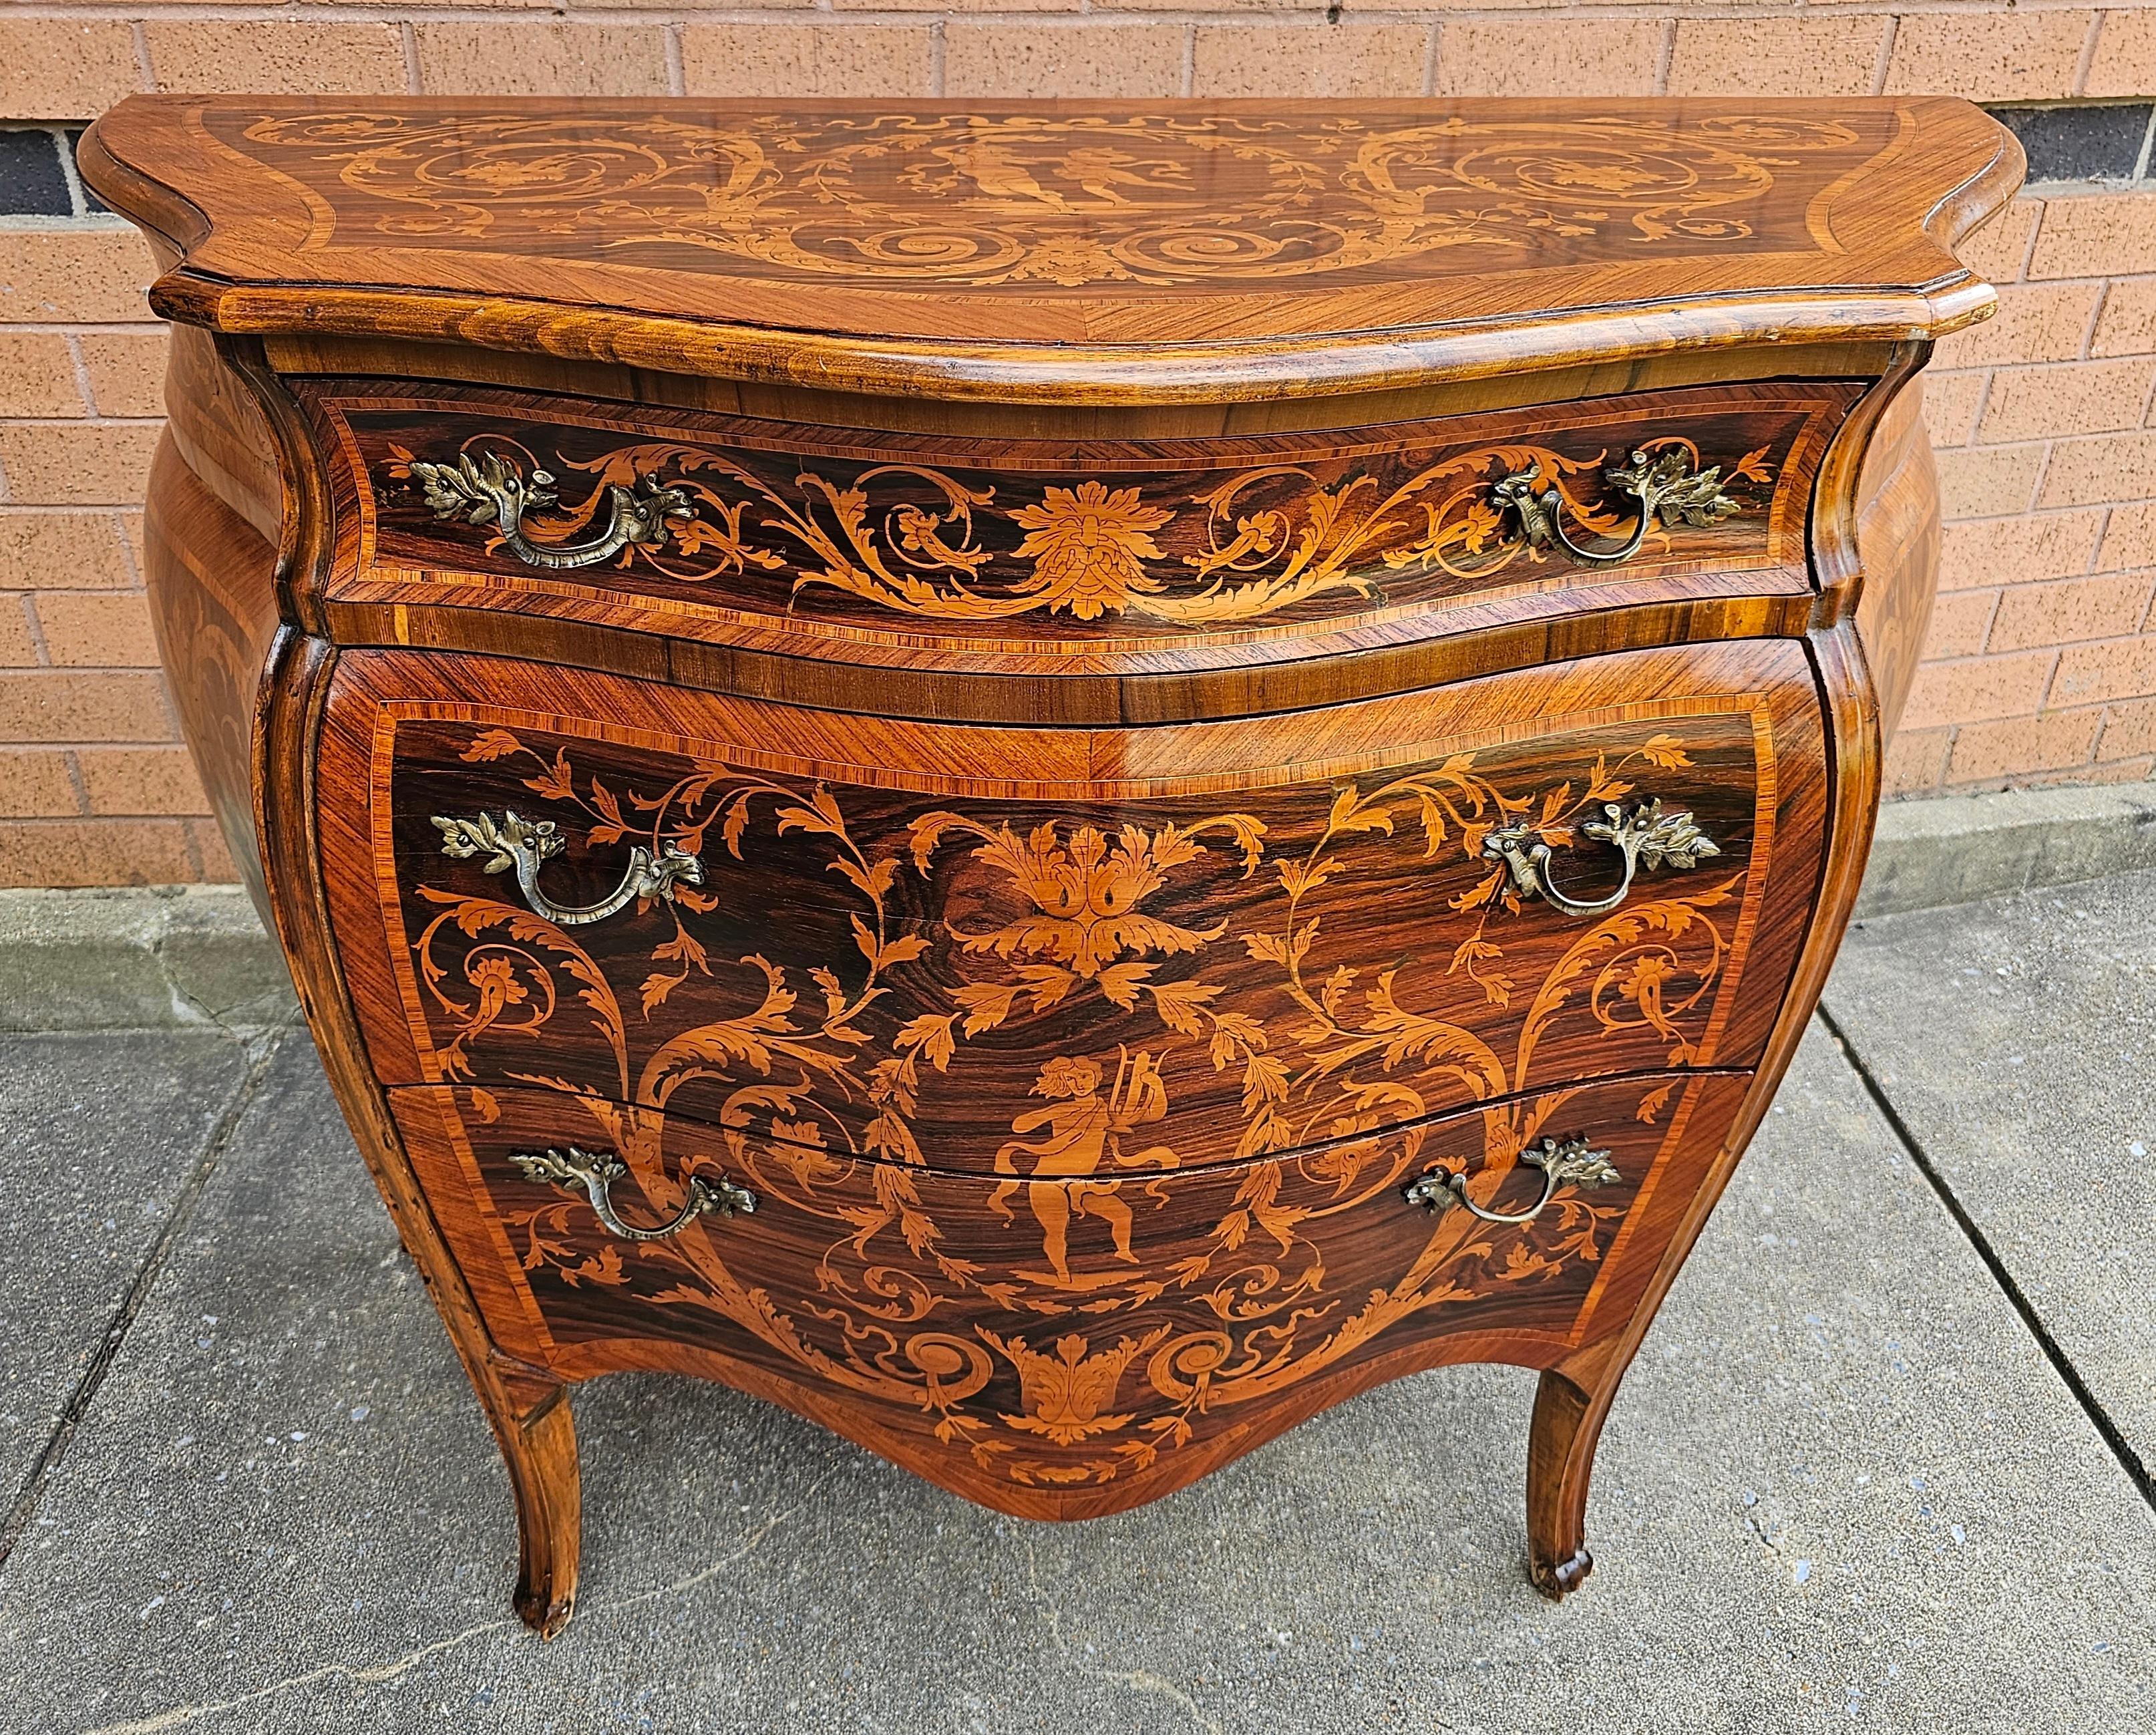 Dutch Colonial 19th C. Lombard Italian Rococo Marquetry Kingwood and Tulipwood Bombé Commode For Sale